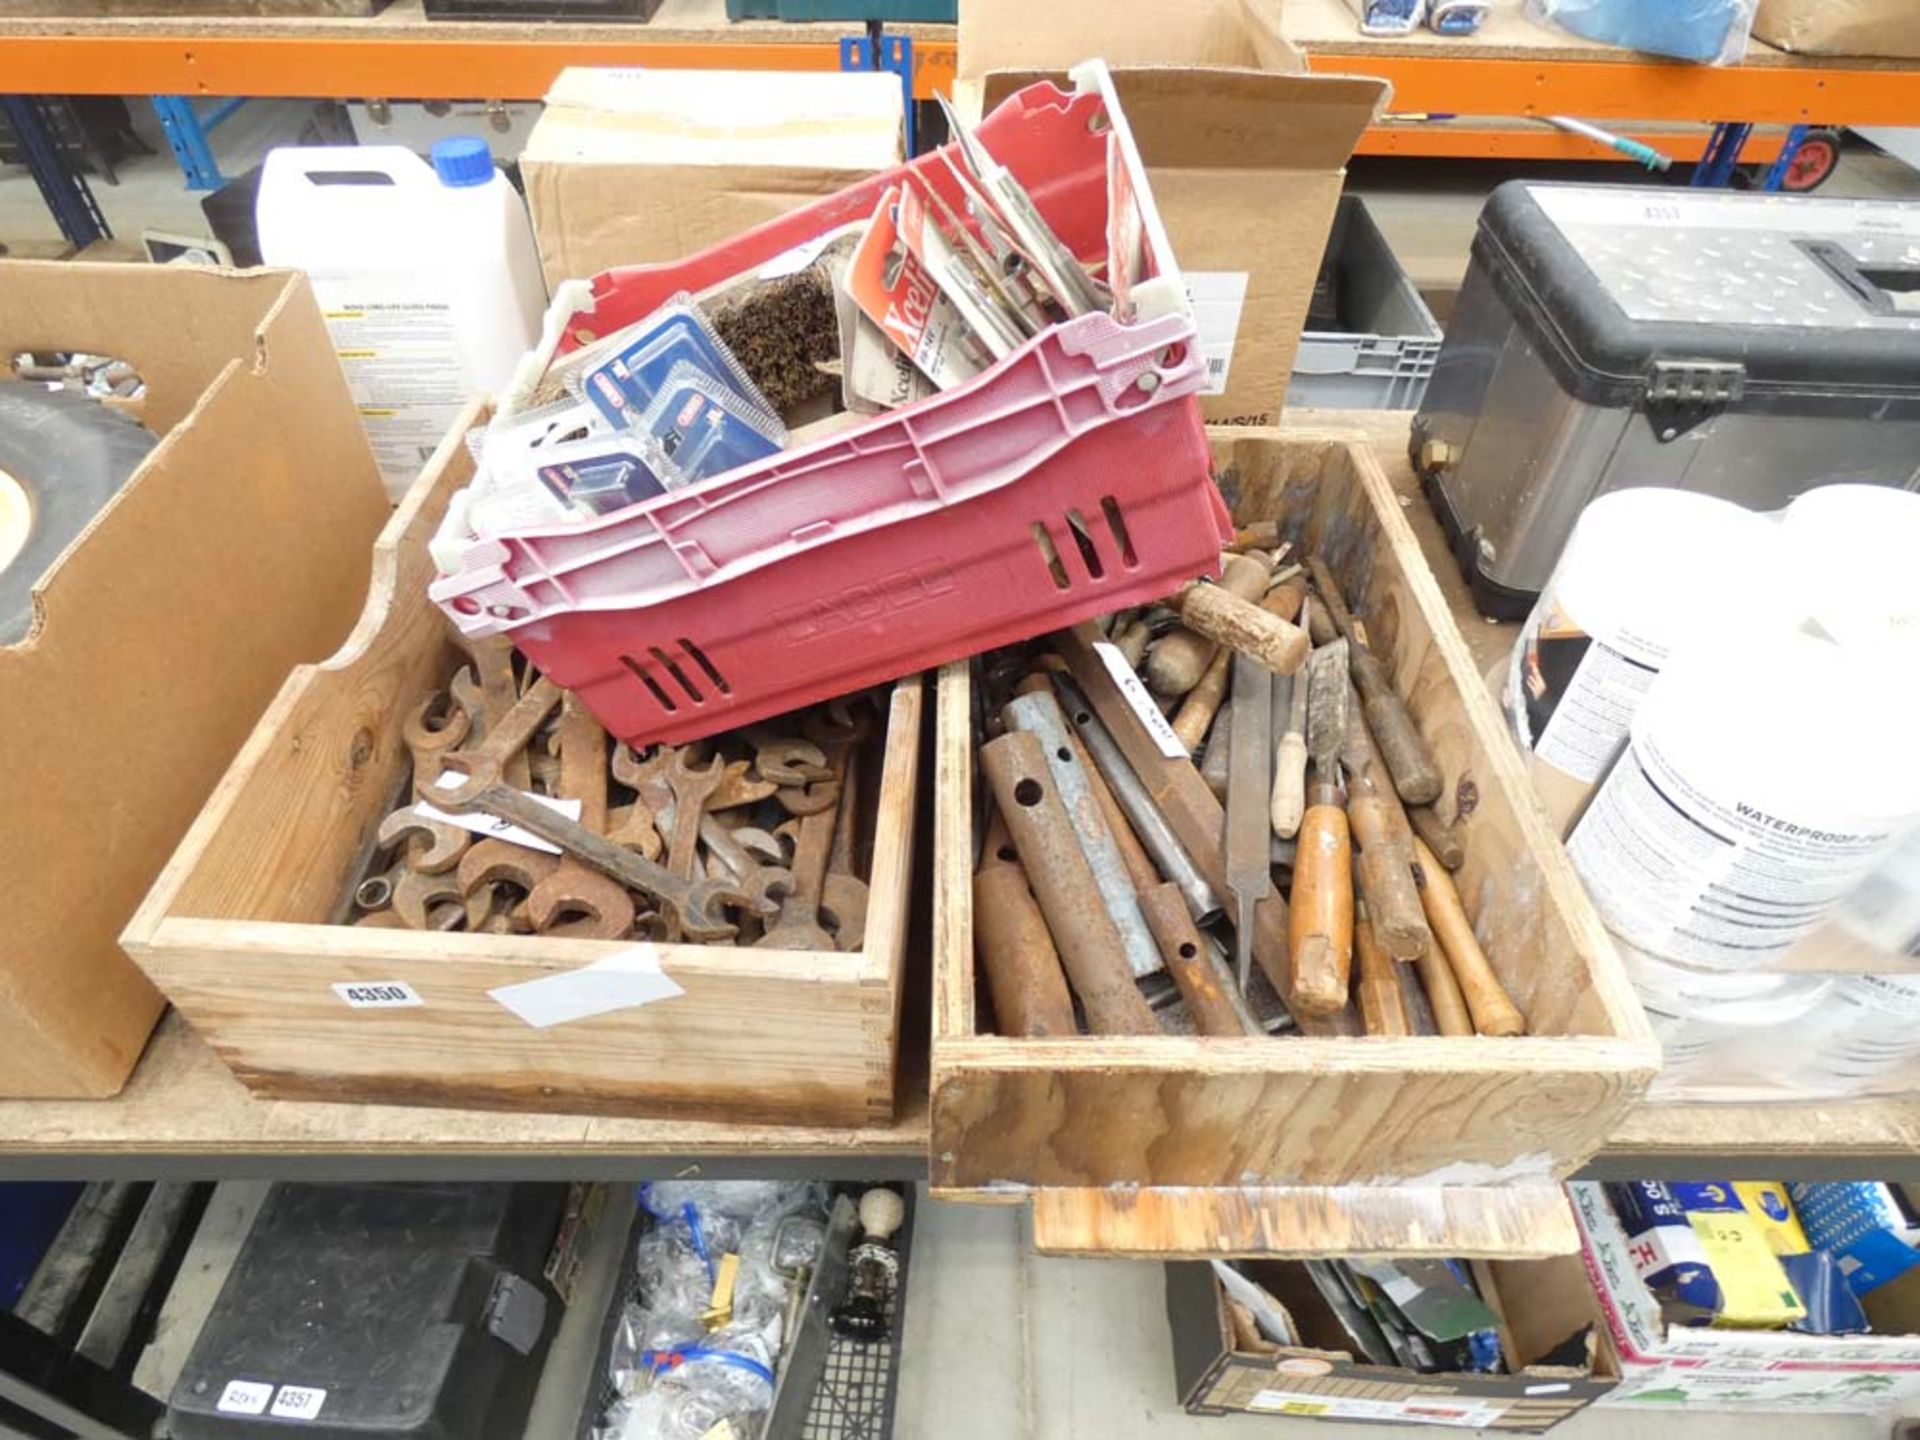 2 wooden boxes and a plastic box containing spanners, brushes, files, locks etc